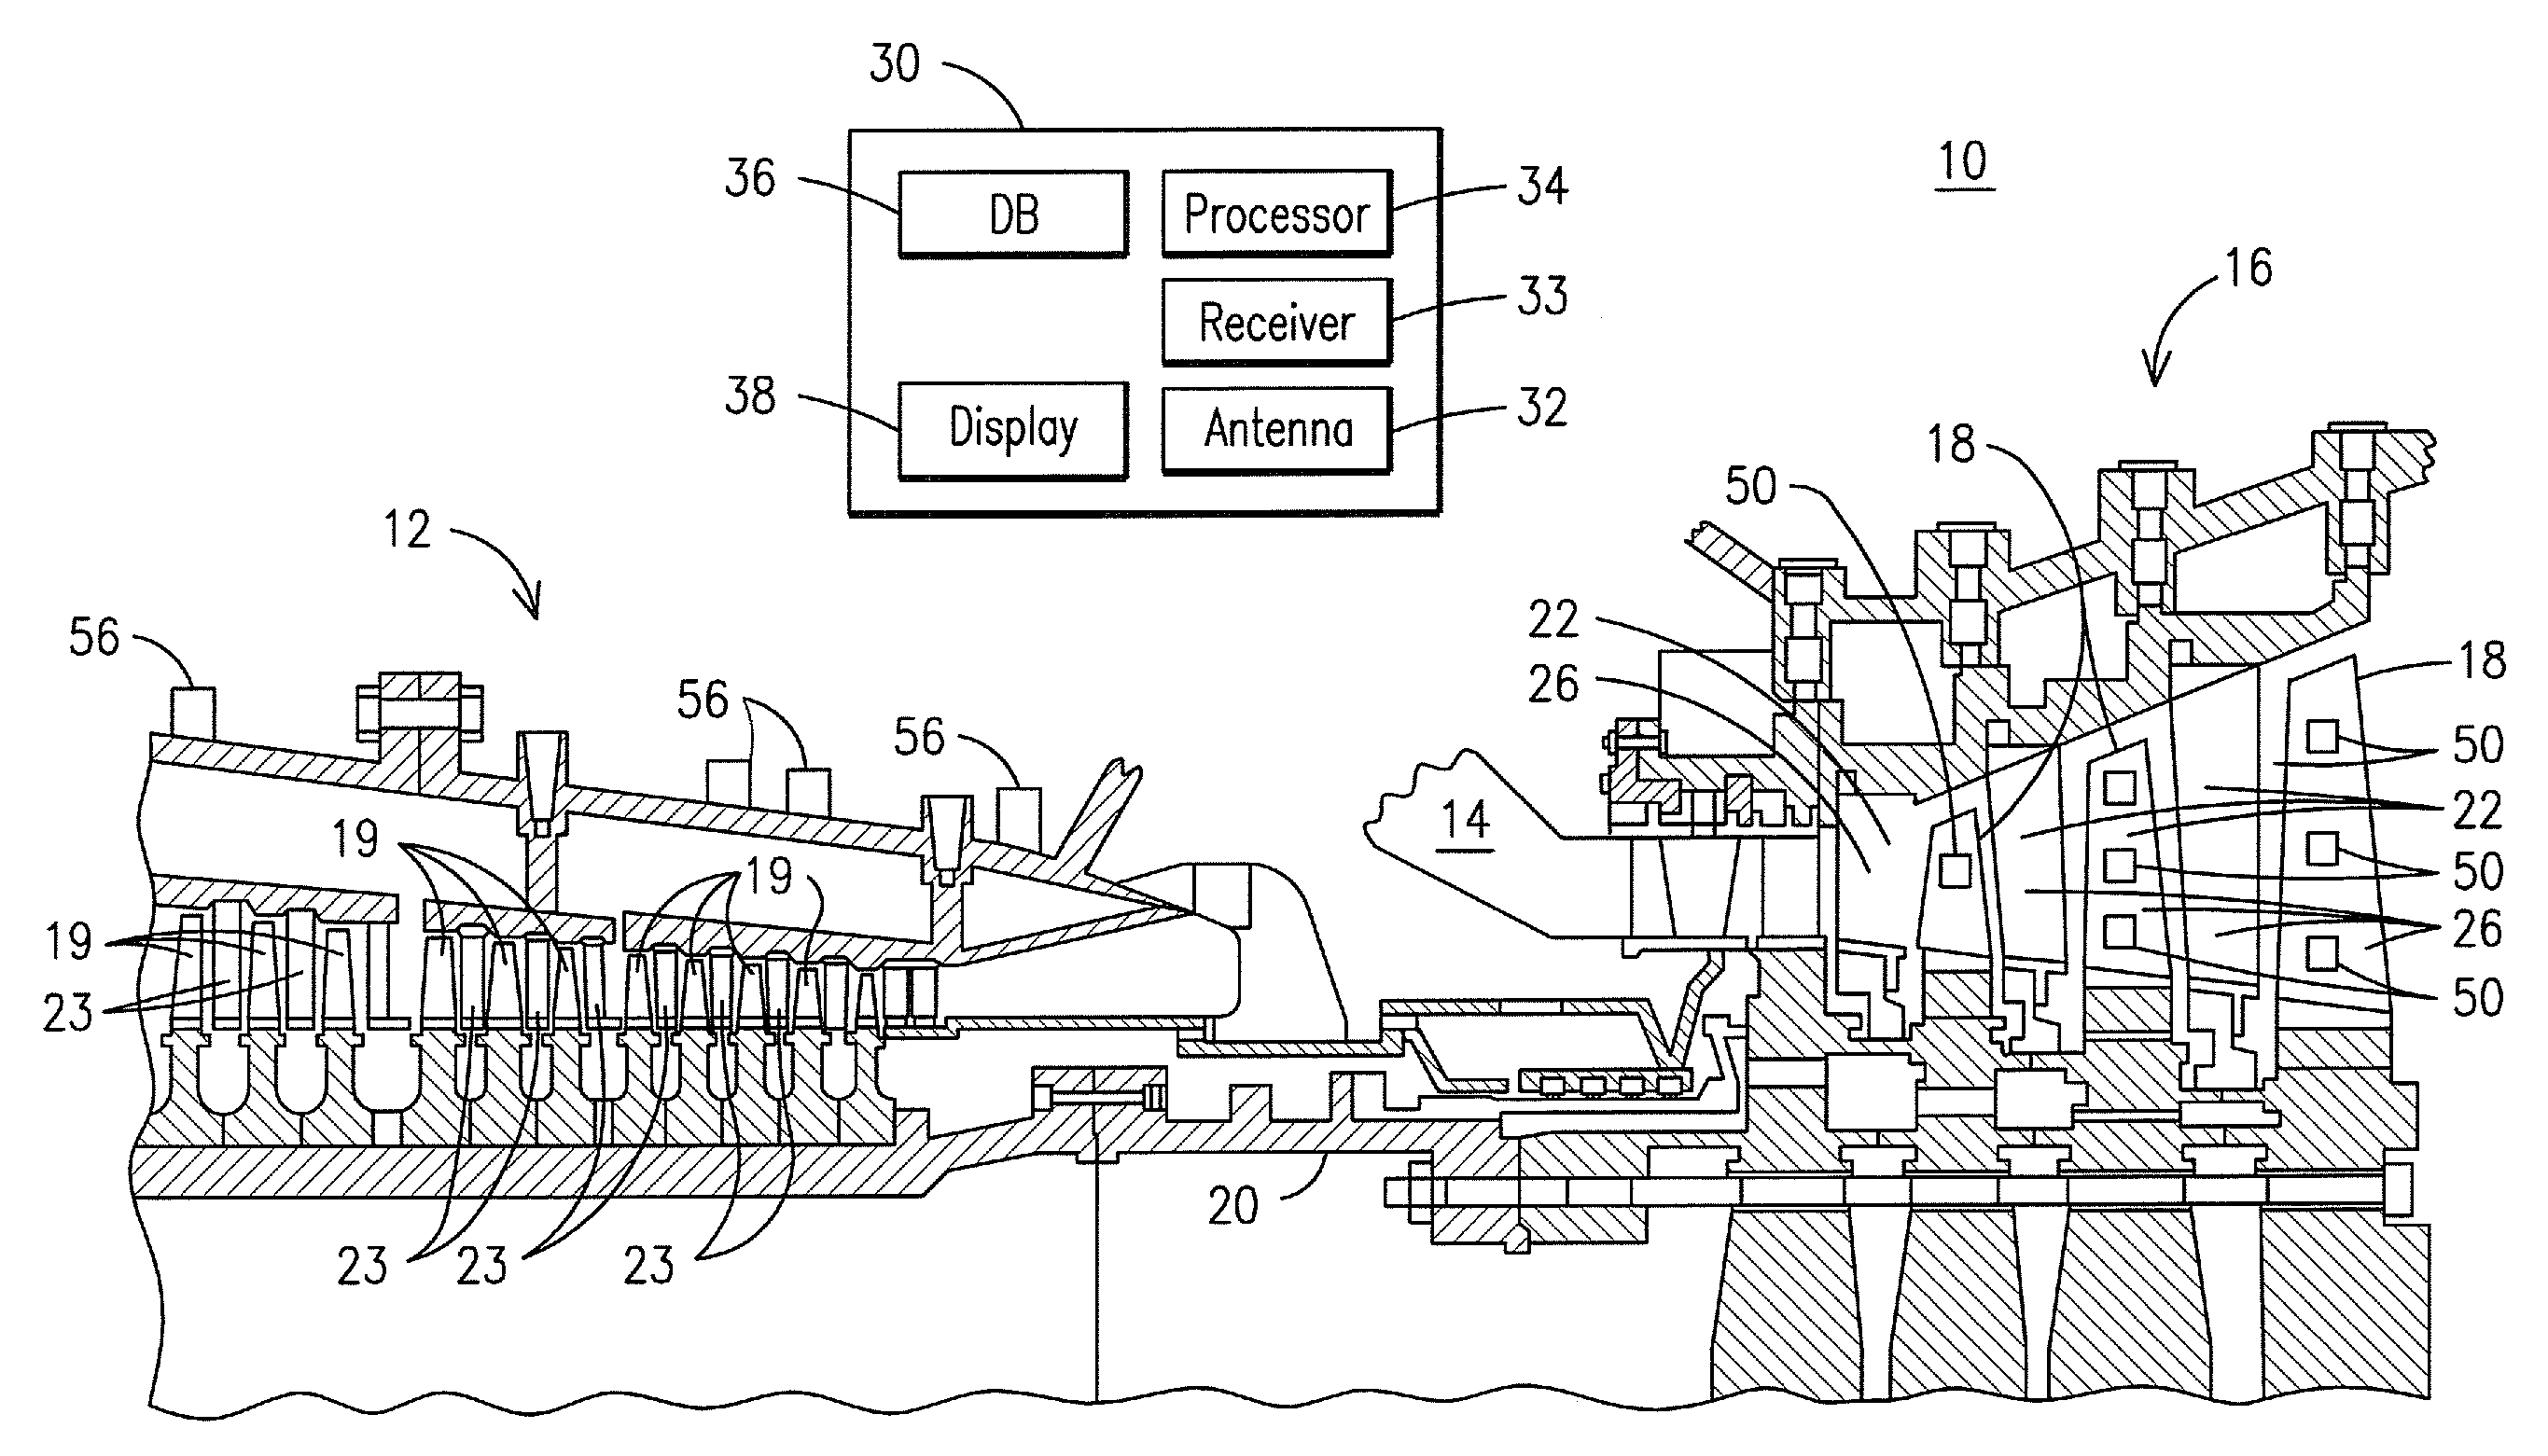 Method for predicting a remaining useful life of an engine and components thereof